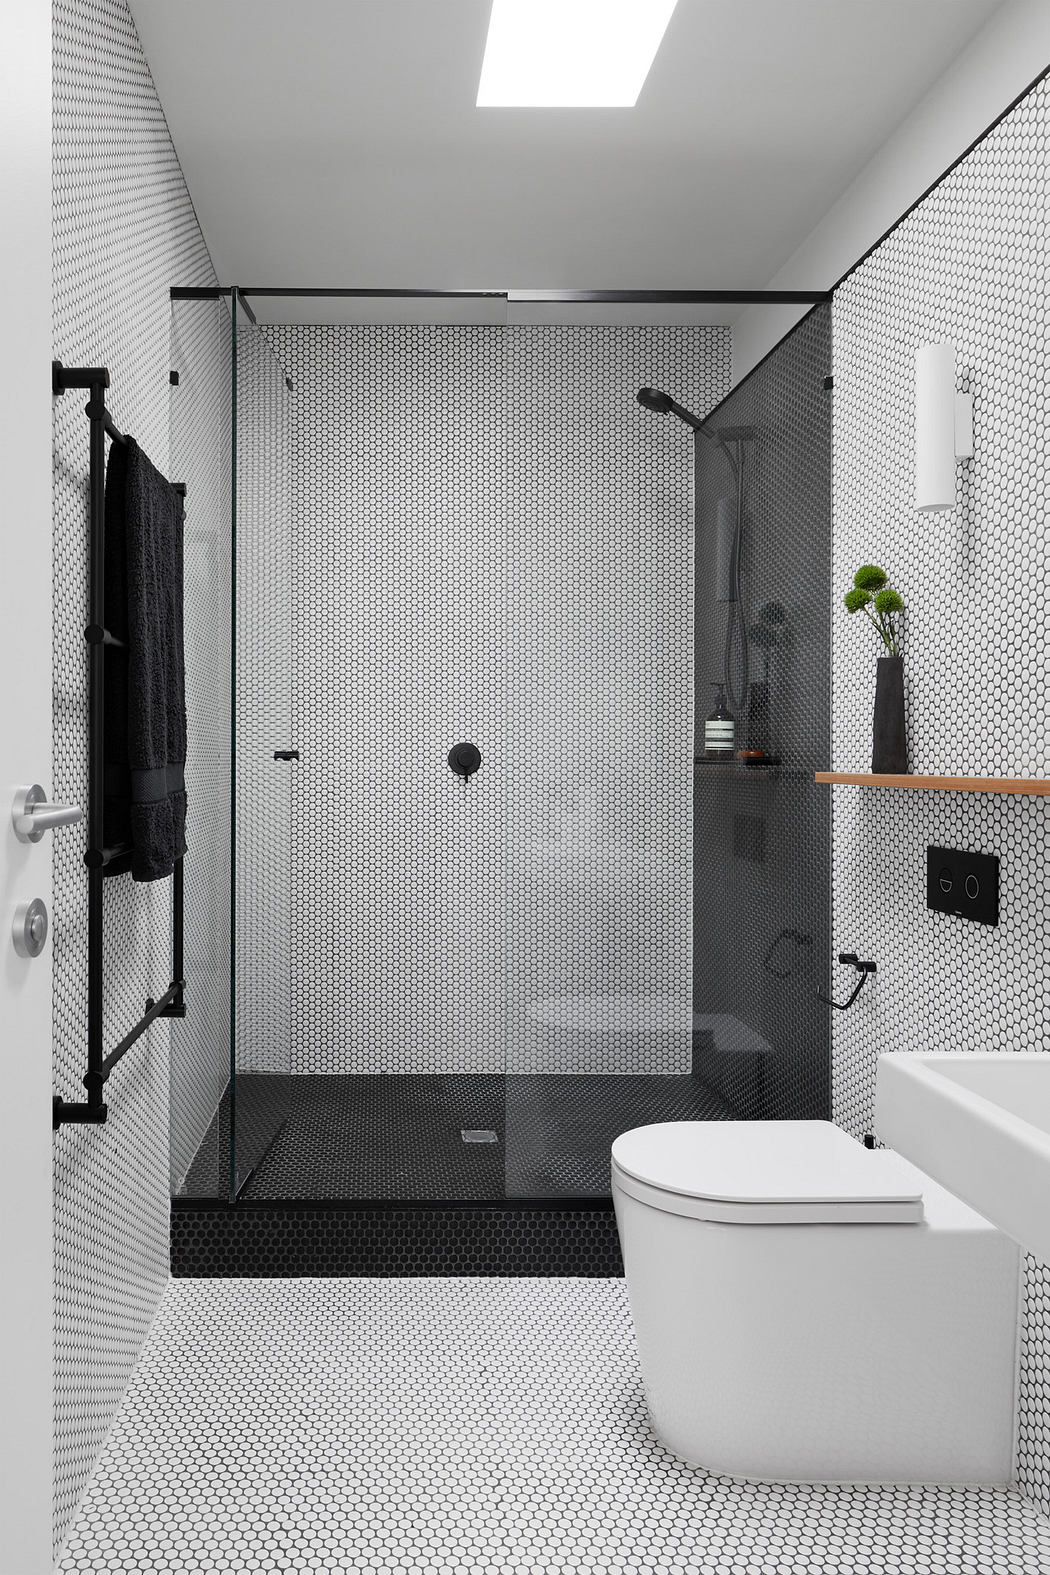 Modern bathroom with black and white mosaic tiles, glass shower, and minimalist fixtures.